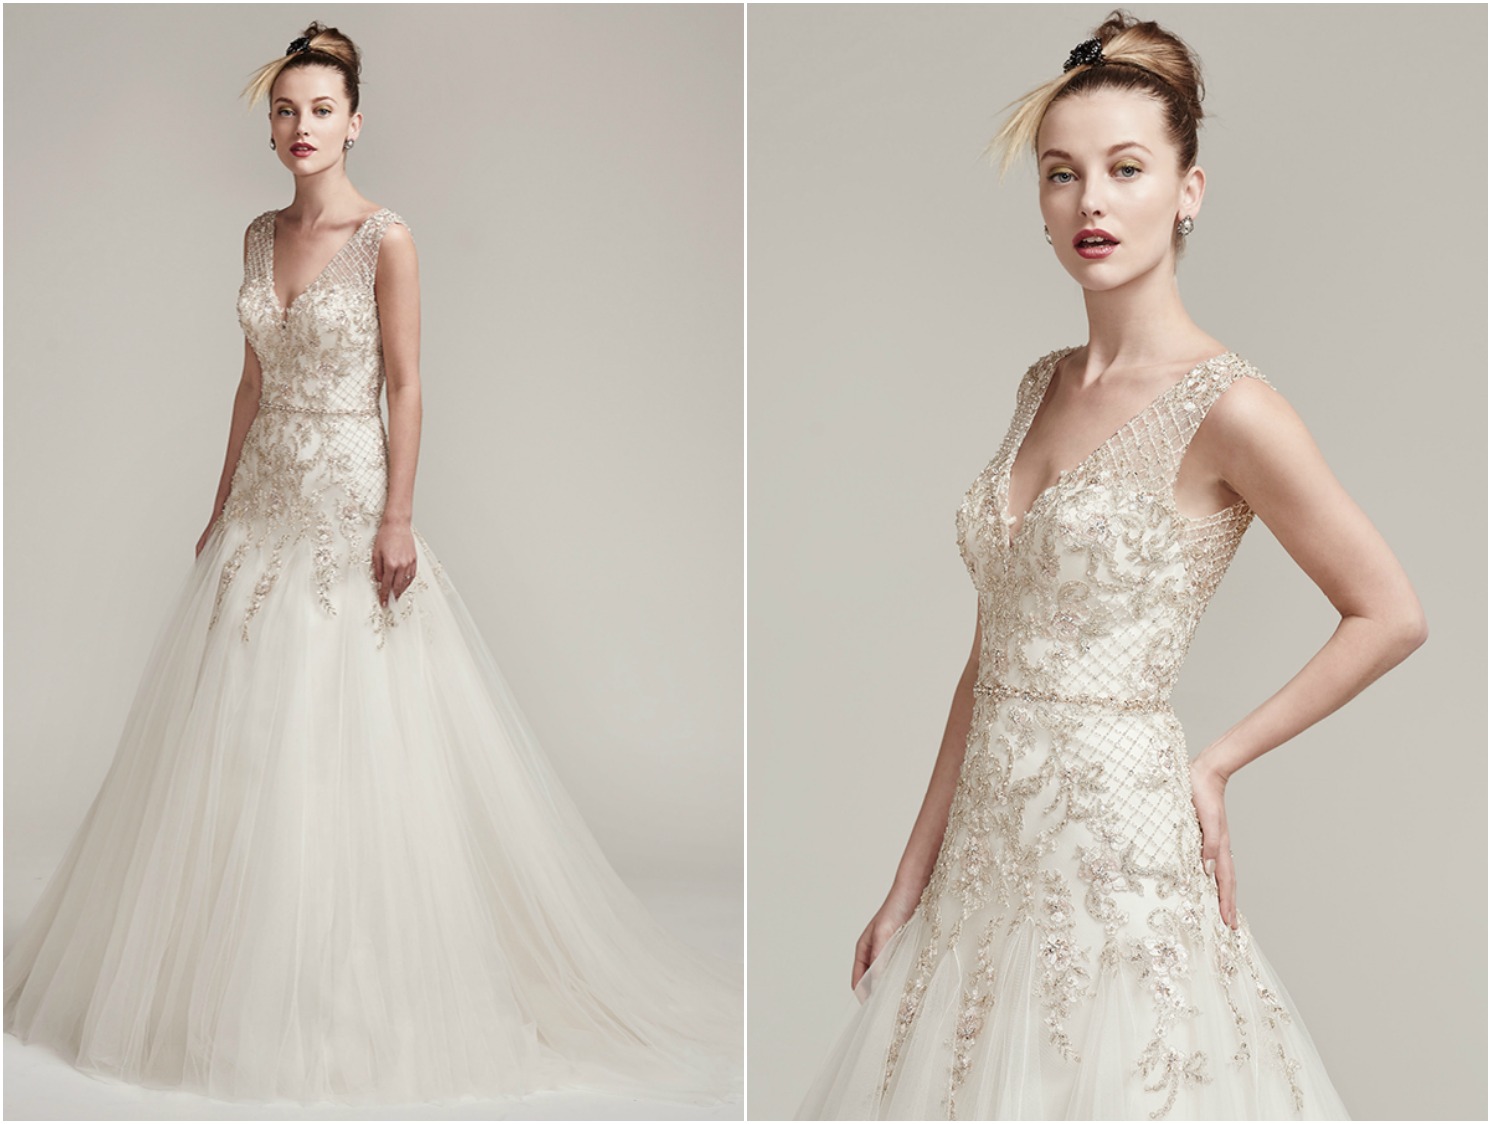 Tulle adds lightweight luxury to this breathtaking A-line wedding dress, featuring crosshatch embellishments of metallic threads, Swarovski crystals, and beads. Complete with beaded illusion lace straps, V-neckline plunging back, and beaded belt. Finished with crystal buttons over zipper closure.

<a href="https://www.maggiesottero.com/sottero-and-midgley/shauntelle/9883" target="_blank">Sottero &amp; Midgley</a>